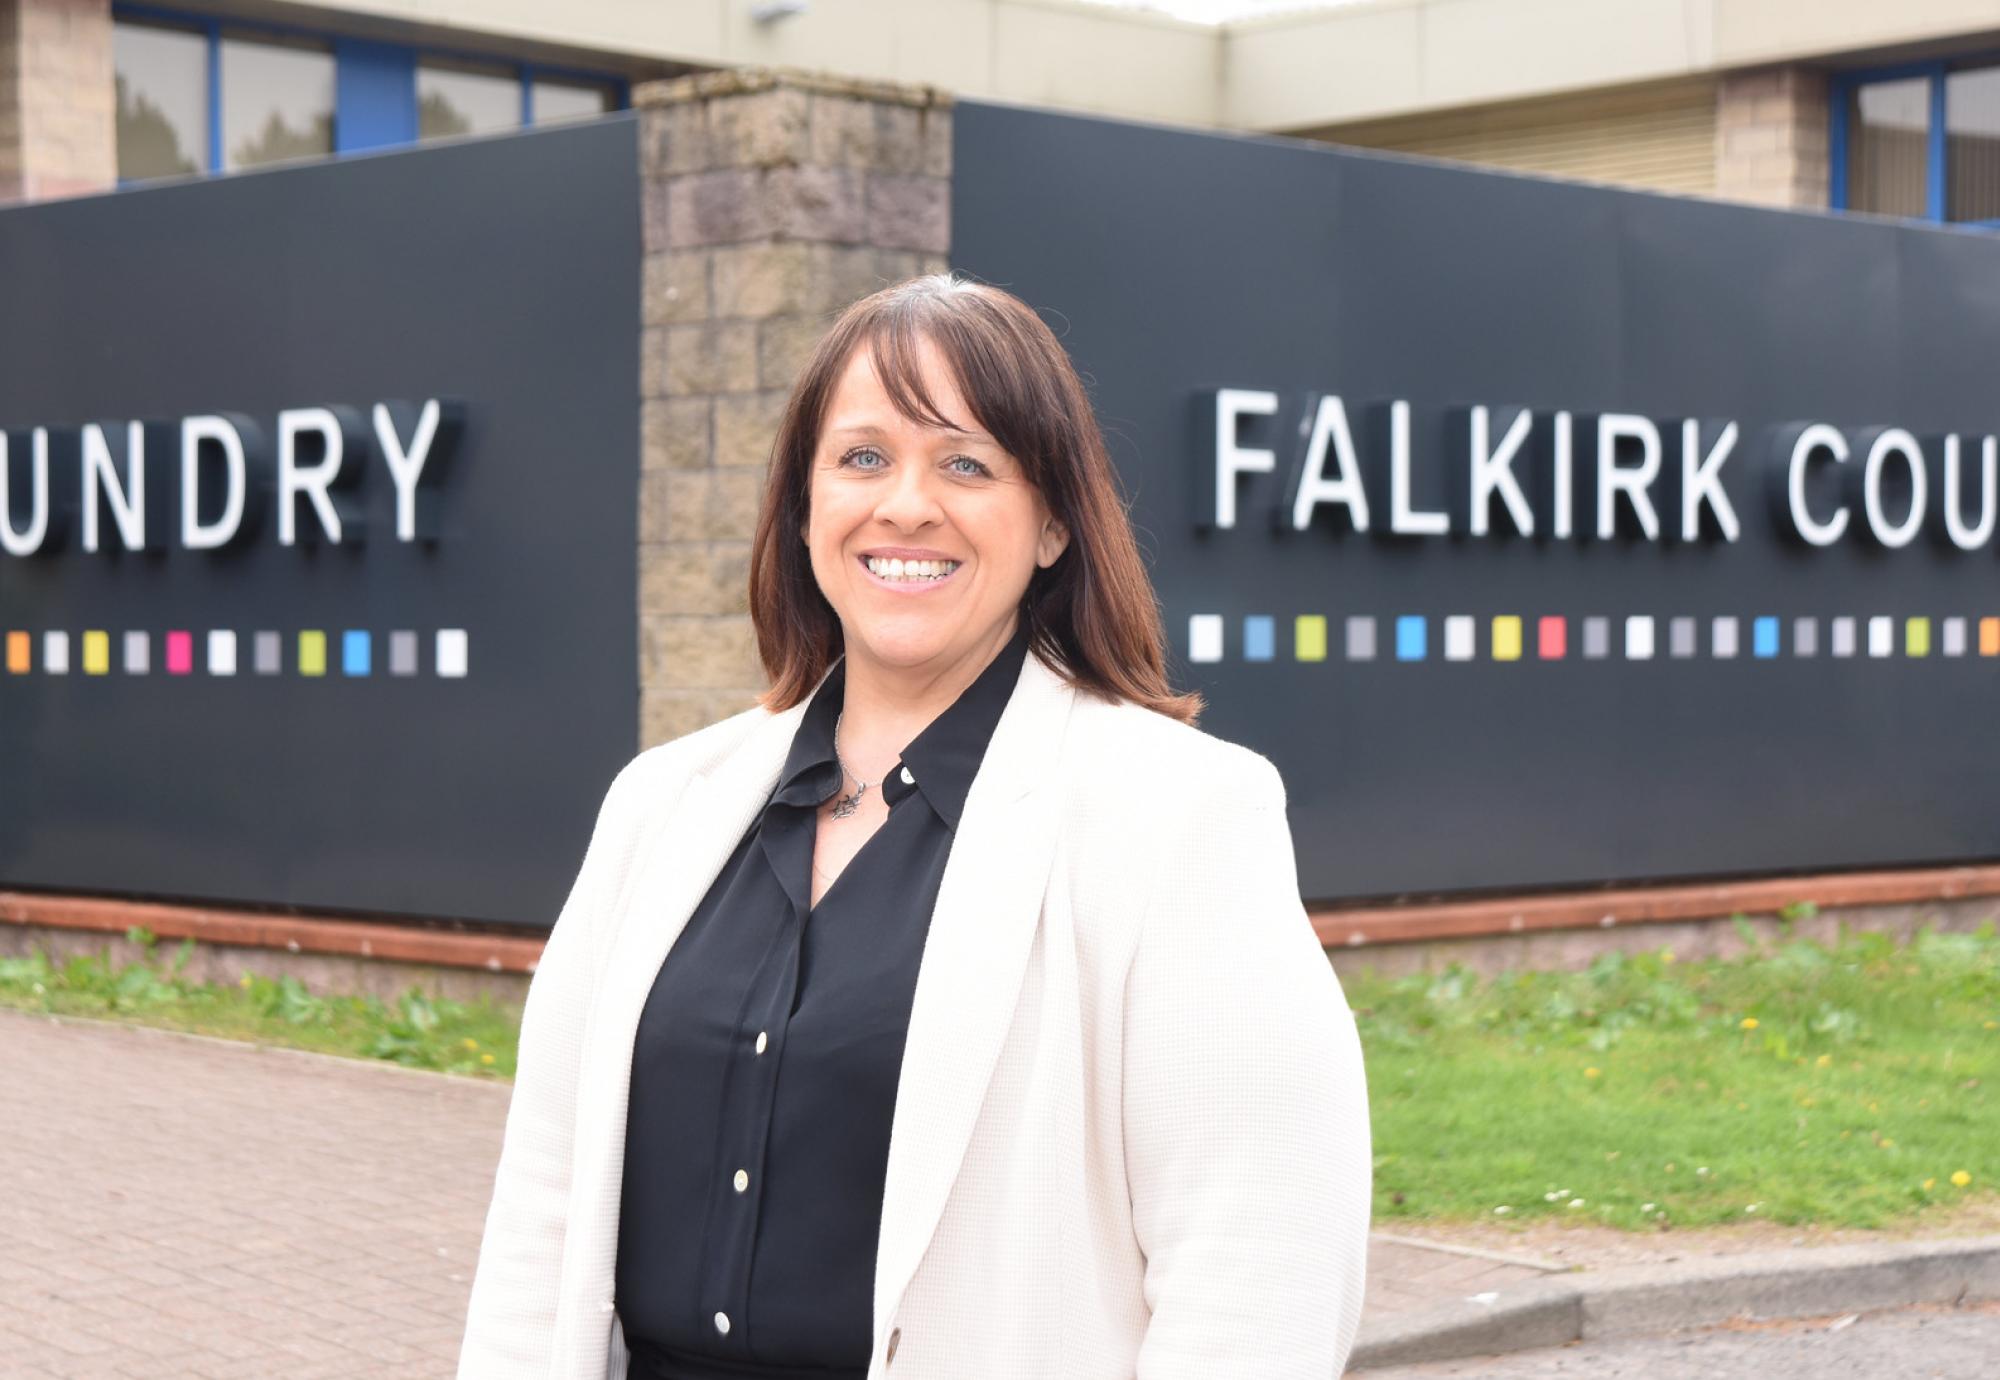 Karen Algie - Falkirk Council's new Director of Transformation, Communities and Corporate Services